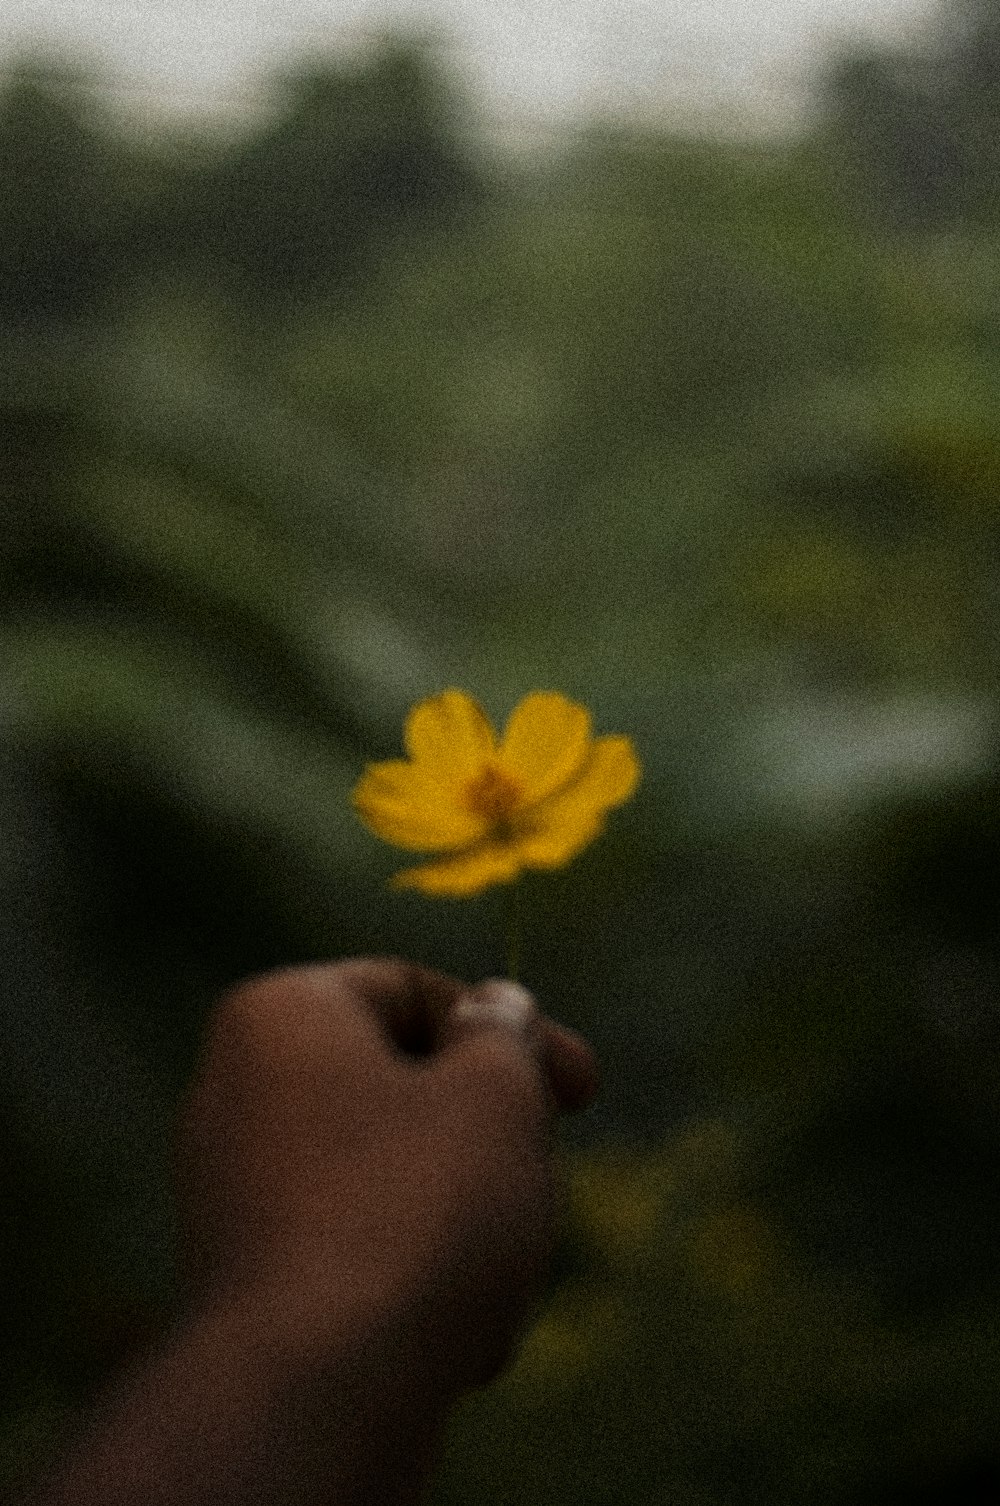 a person holding a yellow flower in their hand